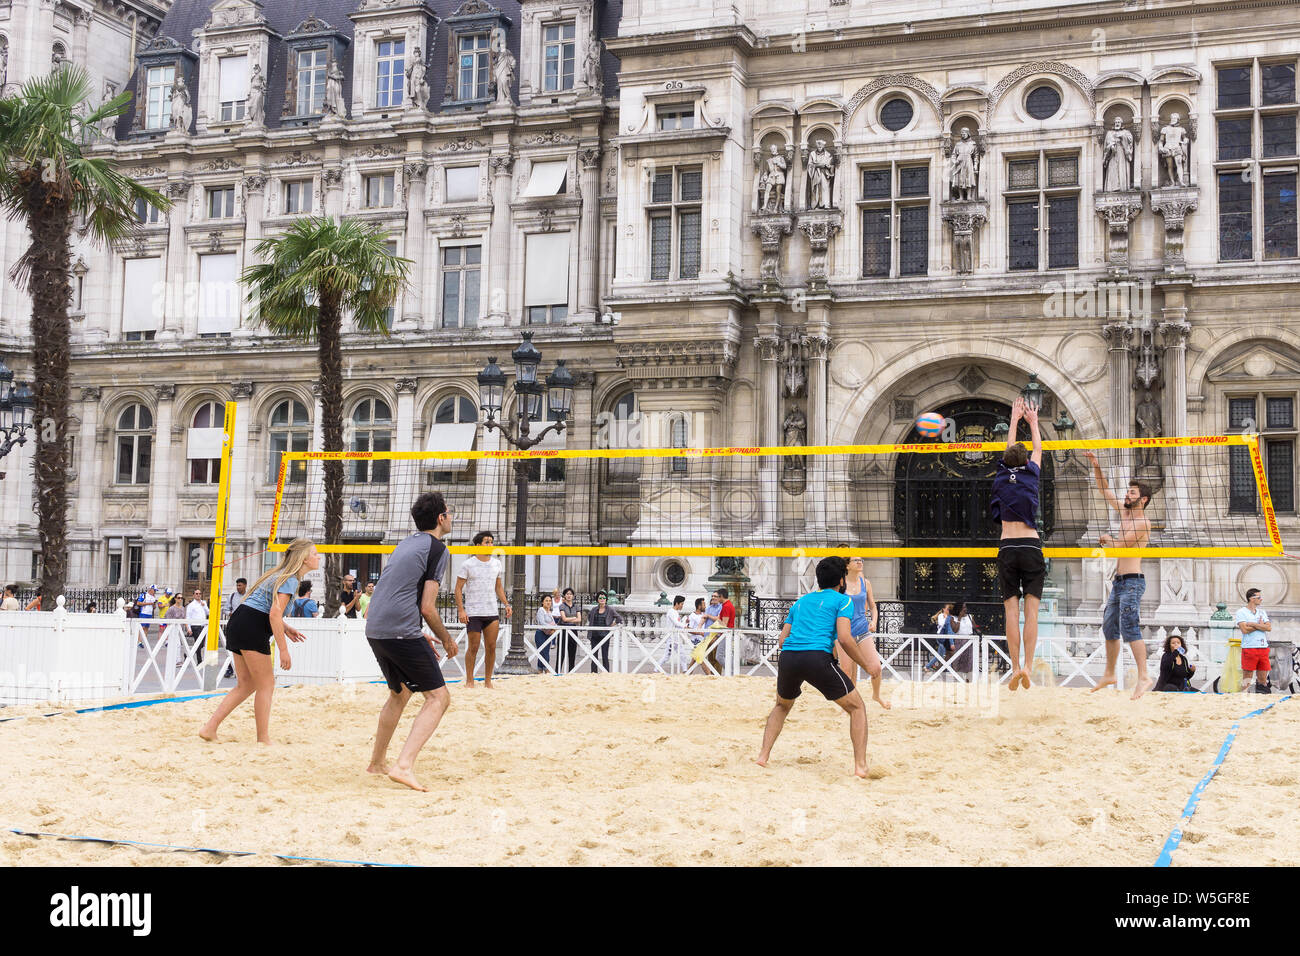 Paris sport - people playing beach volley in front of the Hotel de Ville as part of the annual Paris Plage event in Paris, France, Europe. Stock Photo